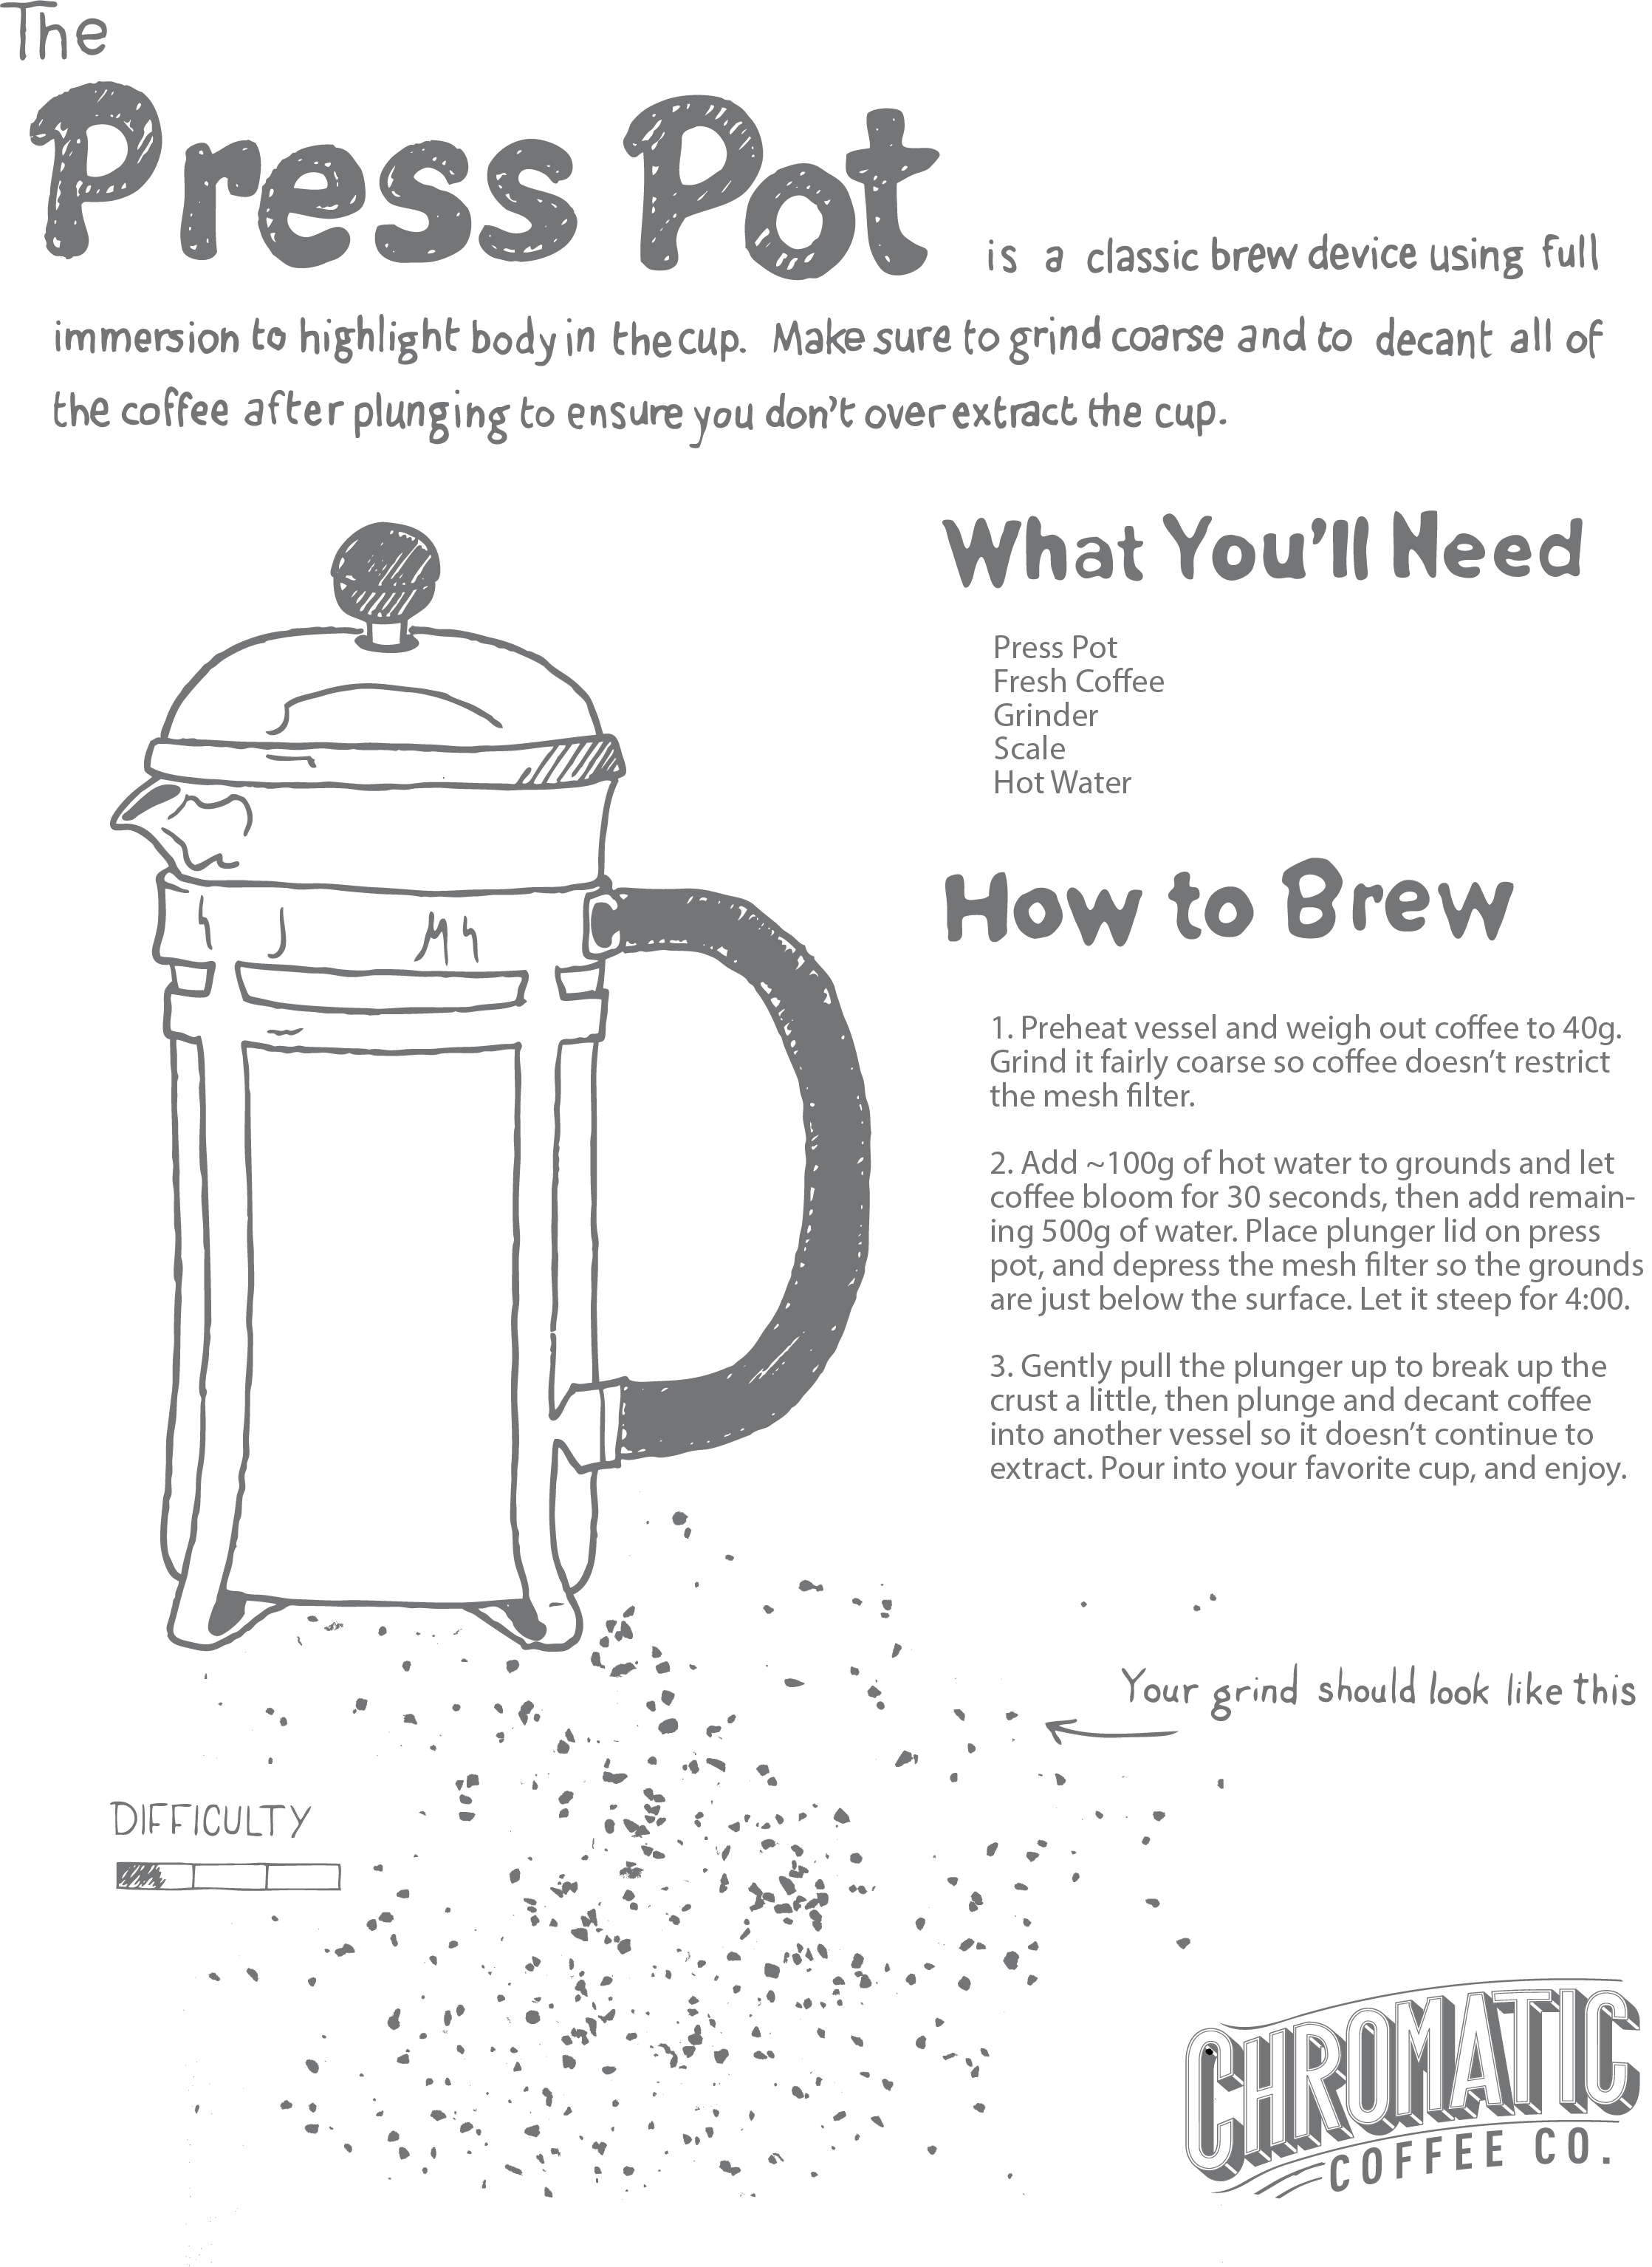 How to Use a French Press: Tools, Ratios, and Step-By-Step Guide